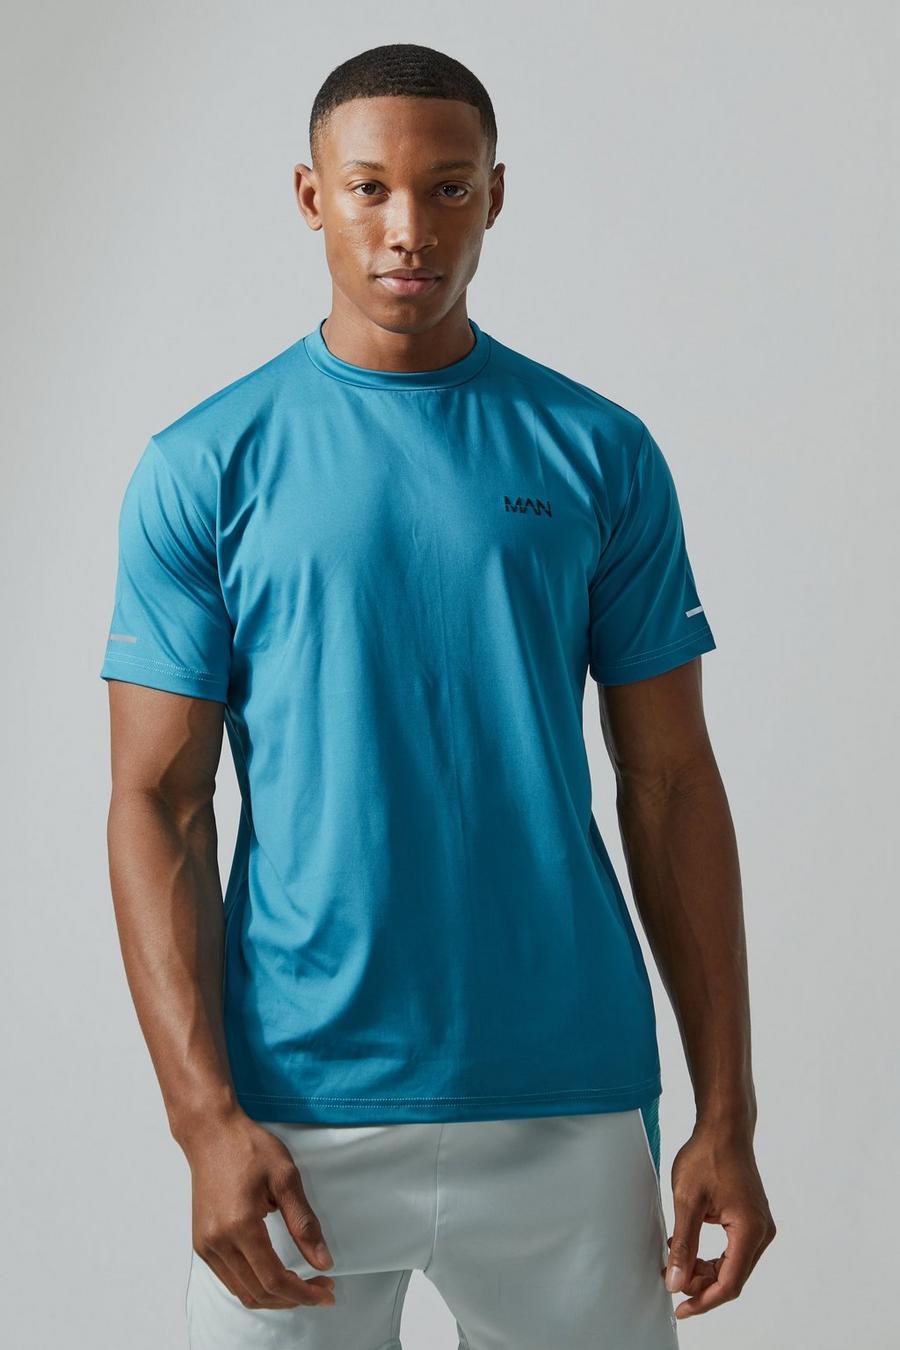 Teal Man Active Performance T-shirt image number 1